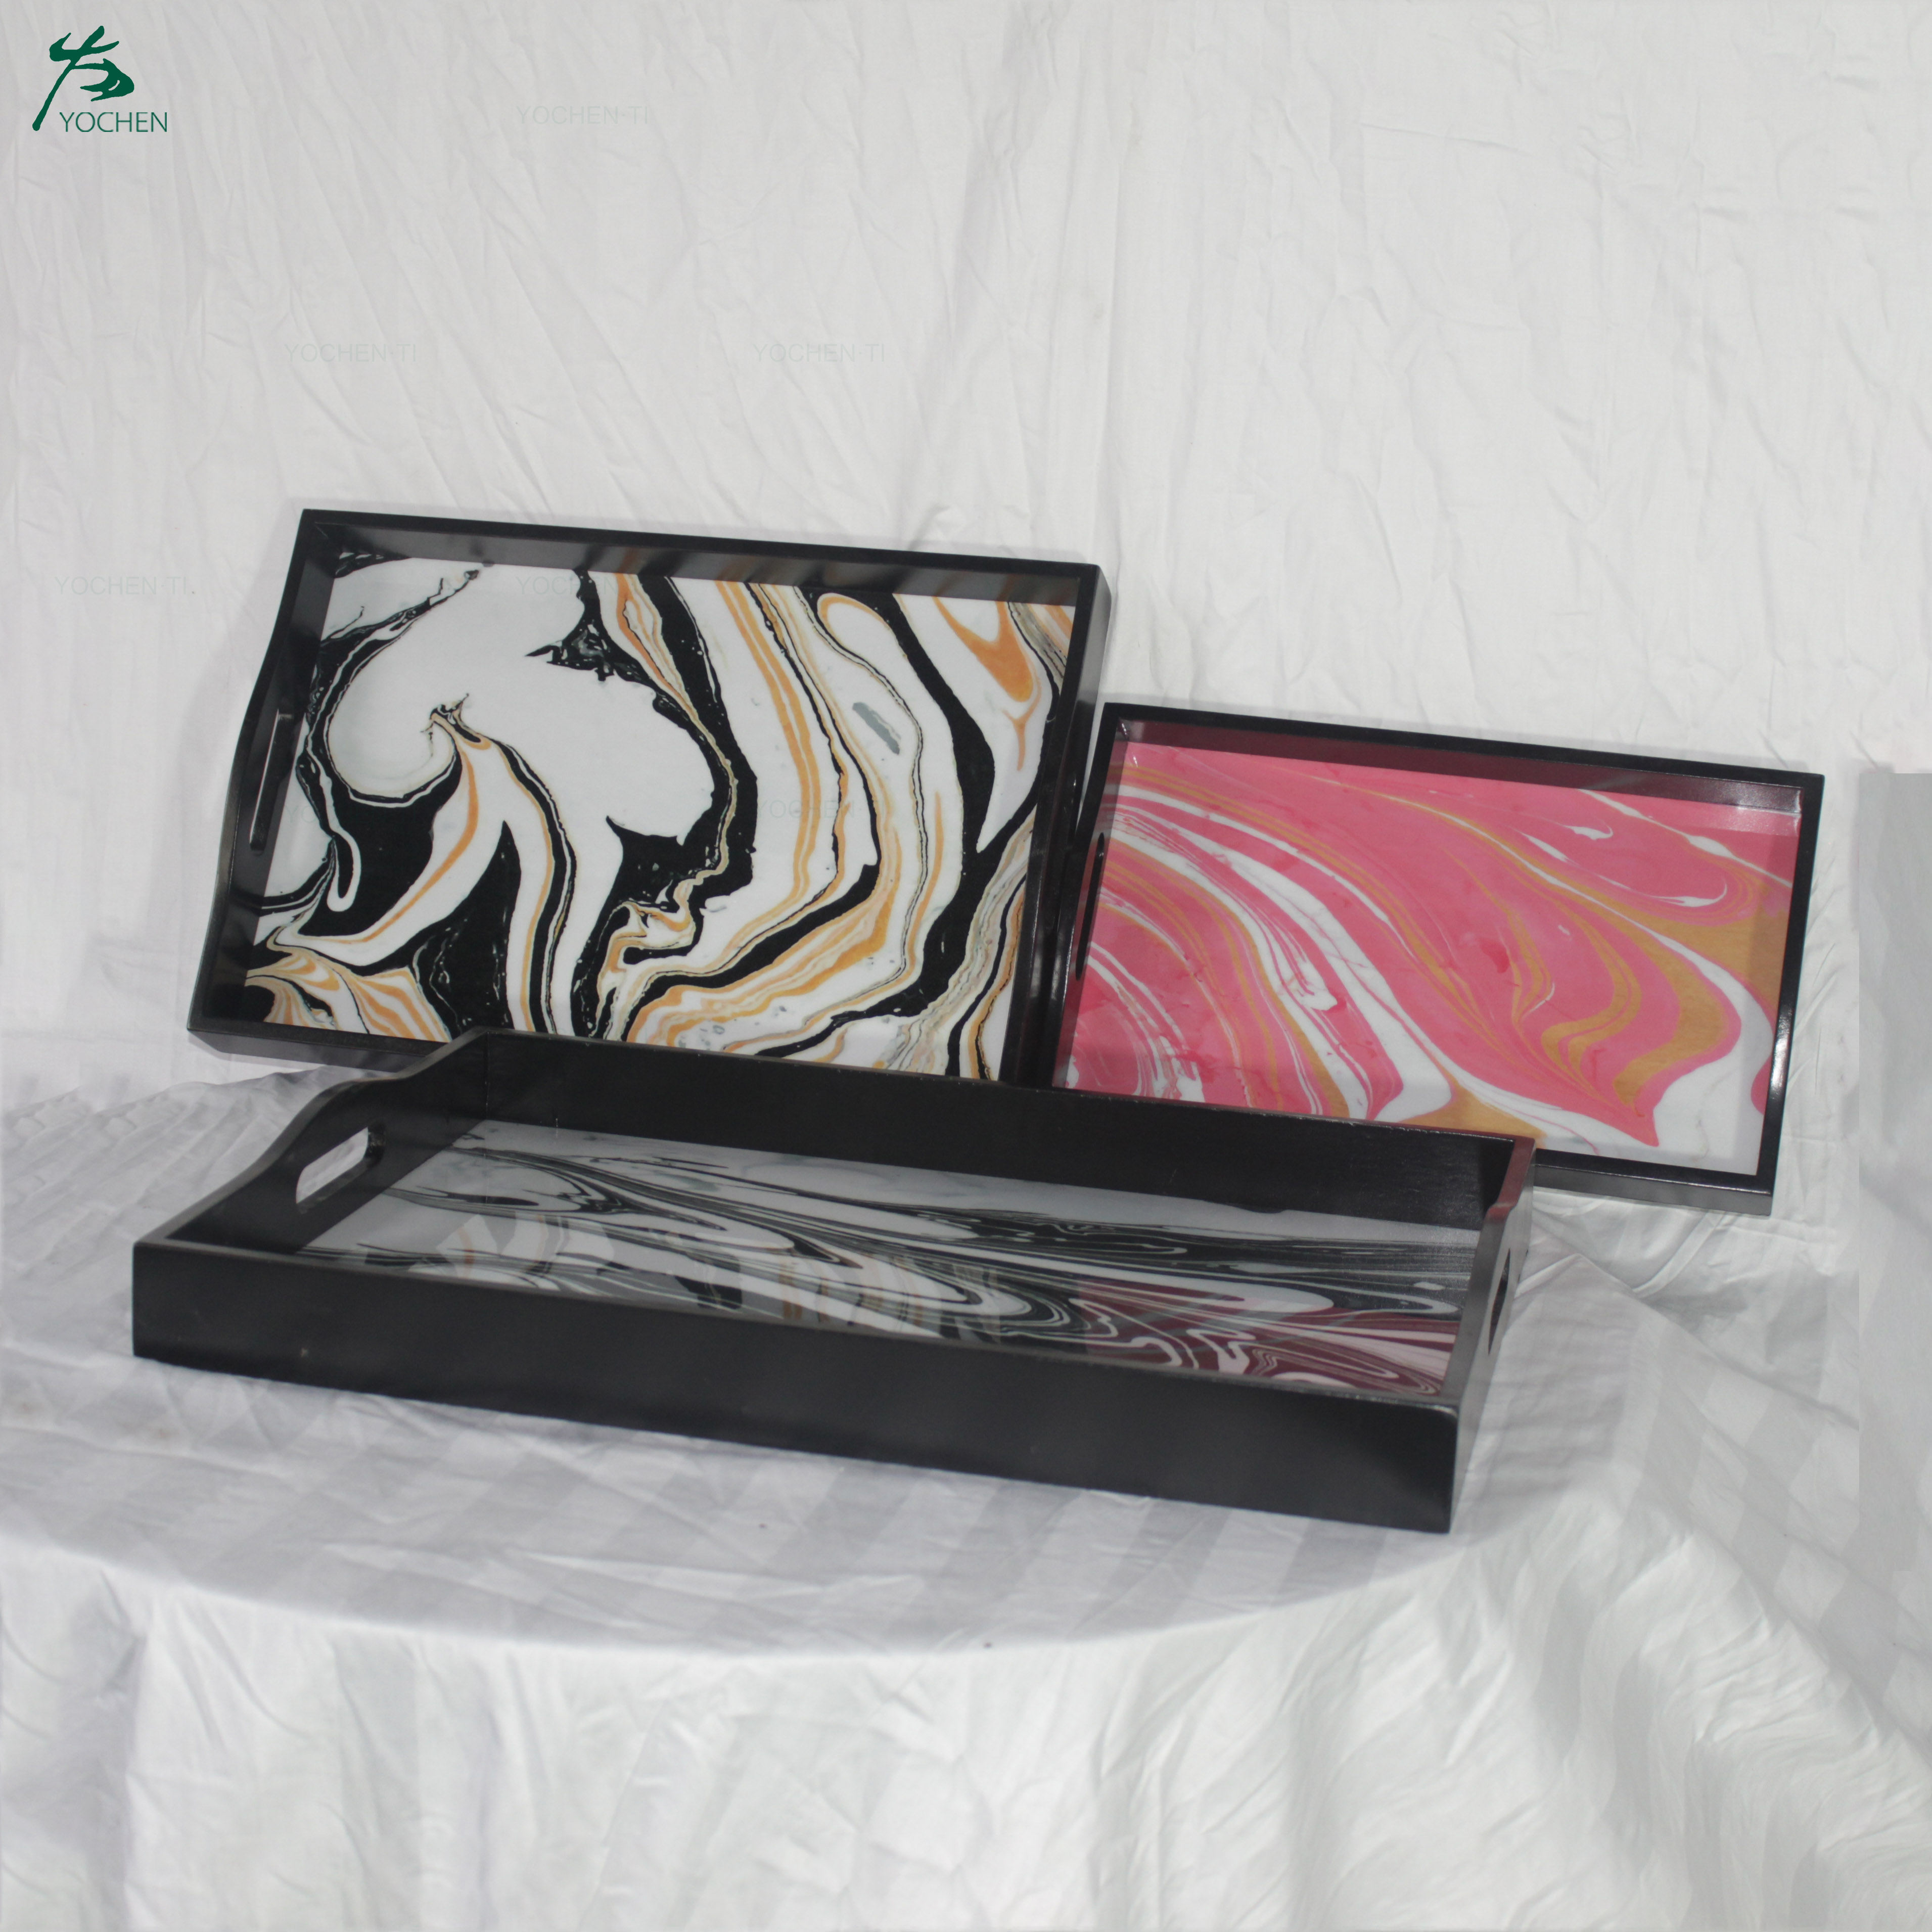 Black Marble Print Wooden Tray Resin Finish Lacquered Frame No Glass Rectangle Serving Tray